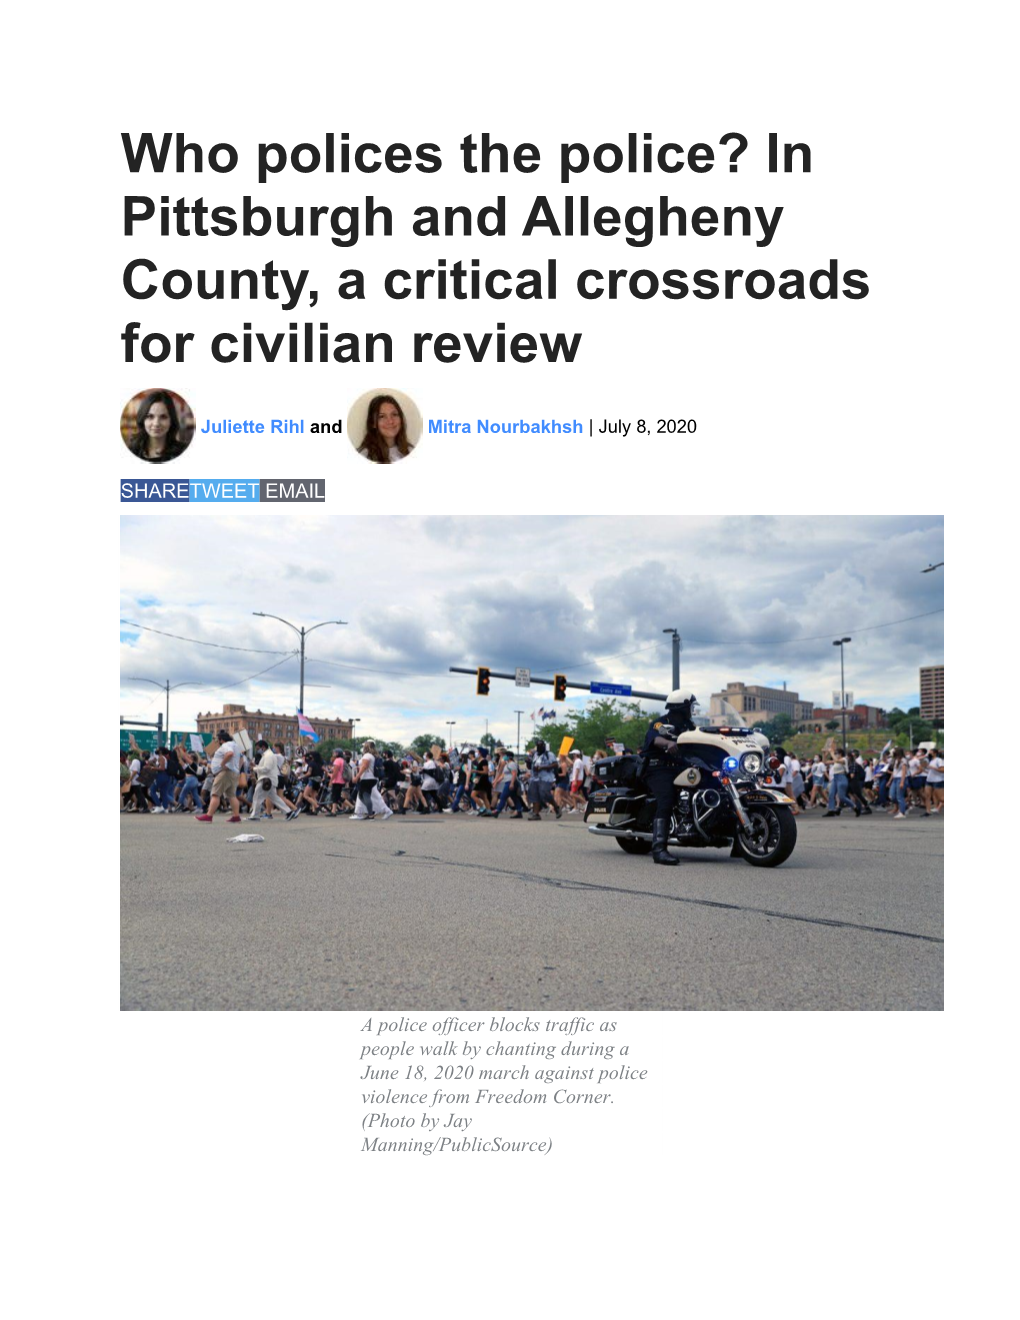 Who Polices the Police? in Pittsburgh and Allegheny County, a Critical Crossroads for Civilian Review